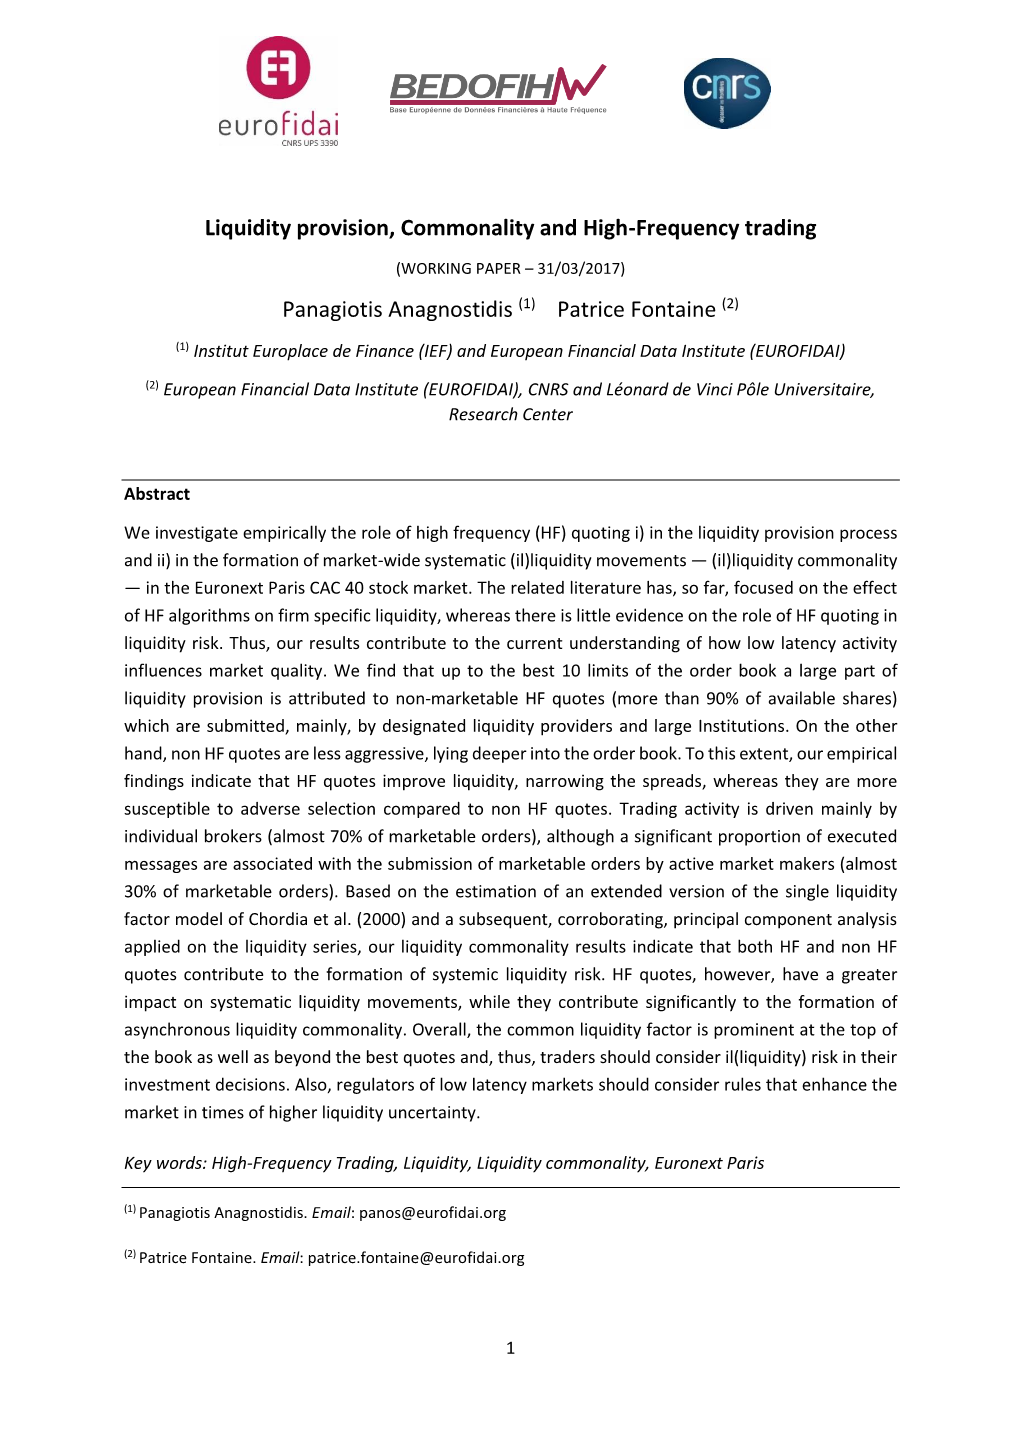 Liquidity Provision, Commonality and High-Frequency Trading Panagiotis Anagnostidis (1) Patrice Fontaine